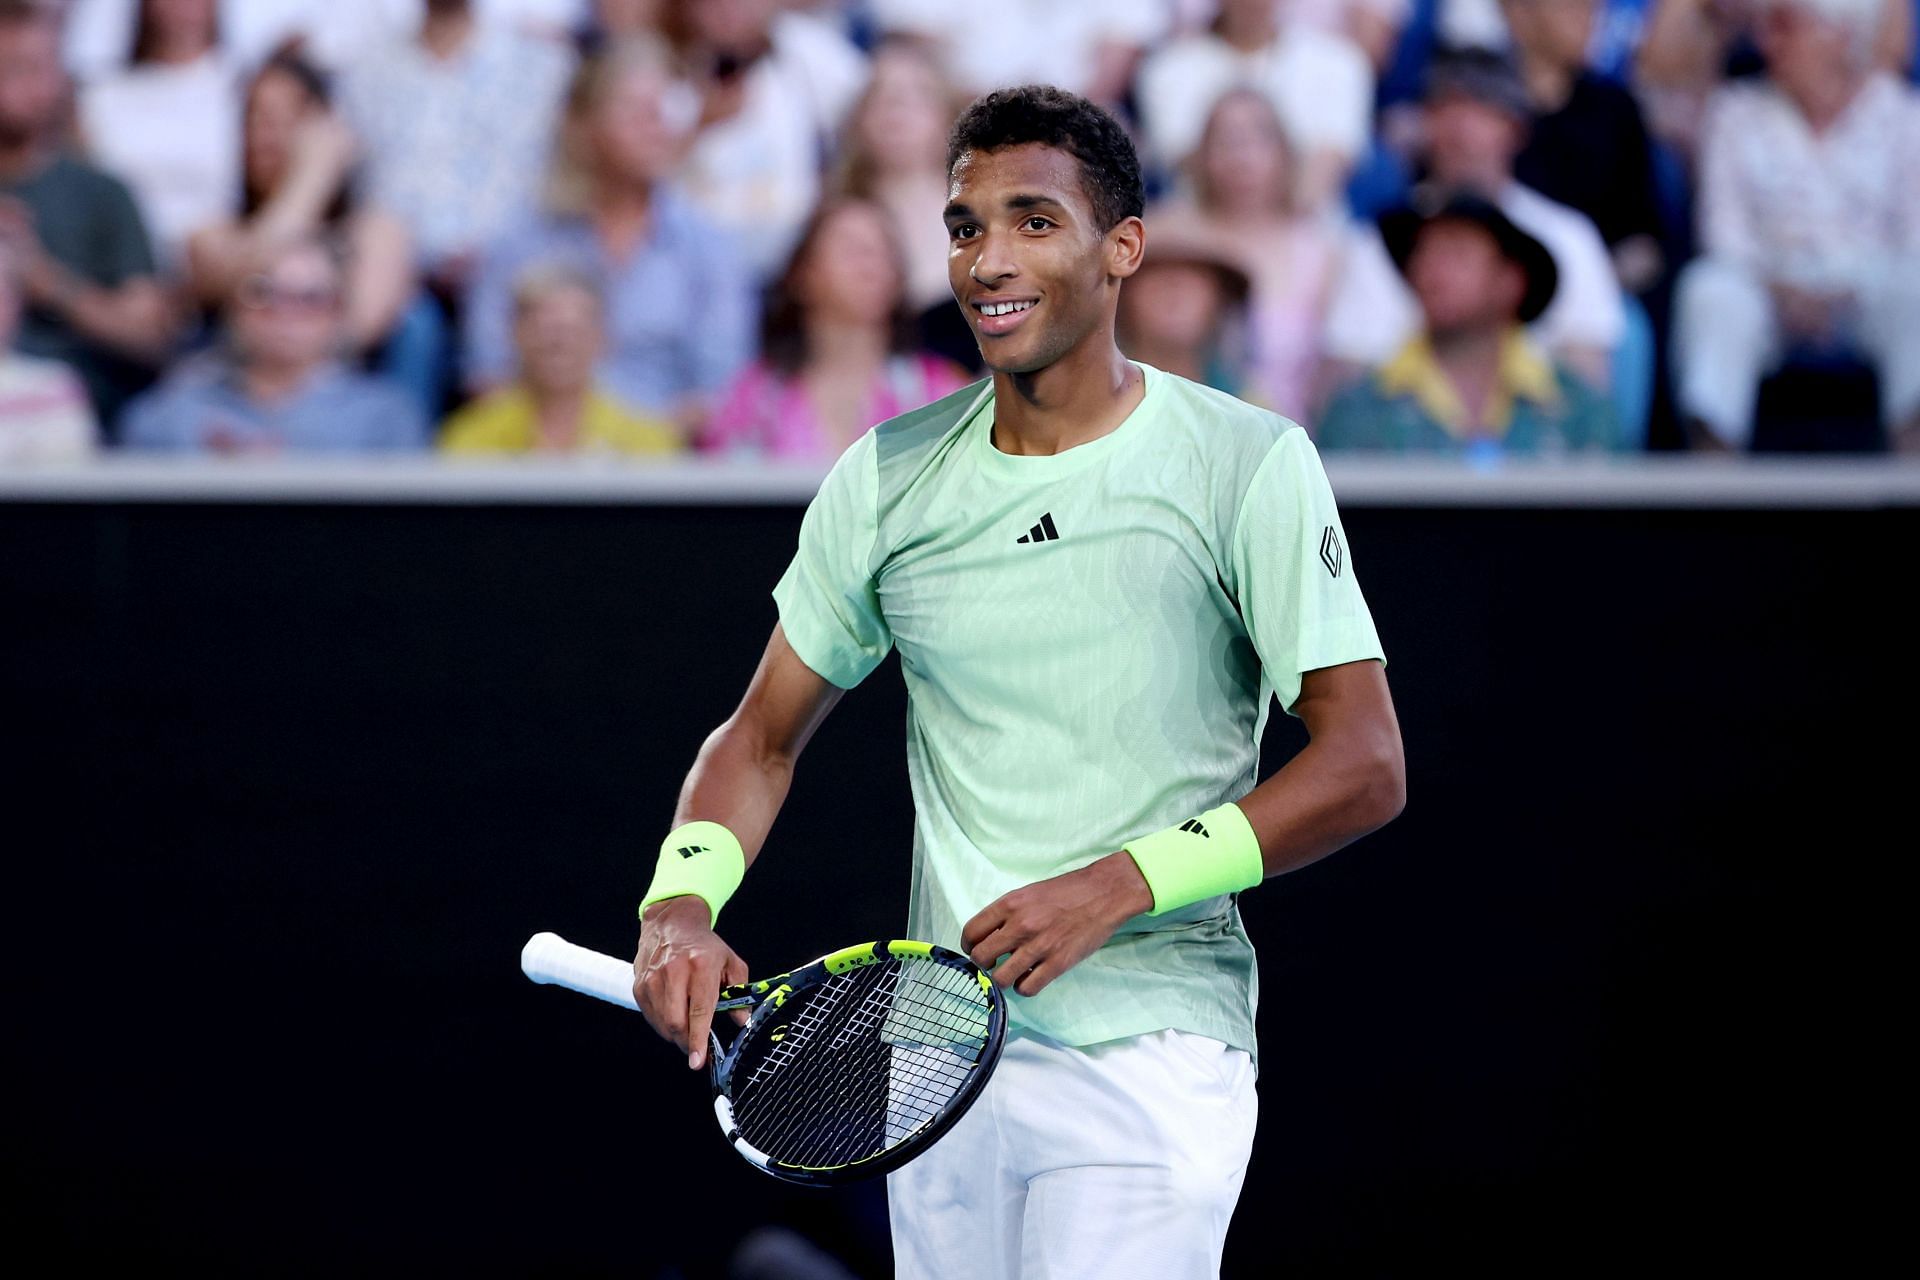 Auger-Aliassime opens his campaign on Thursday.